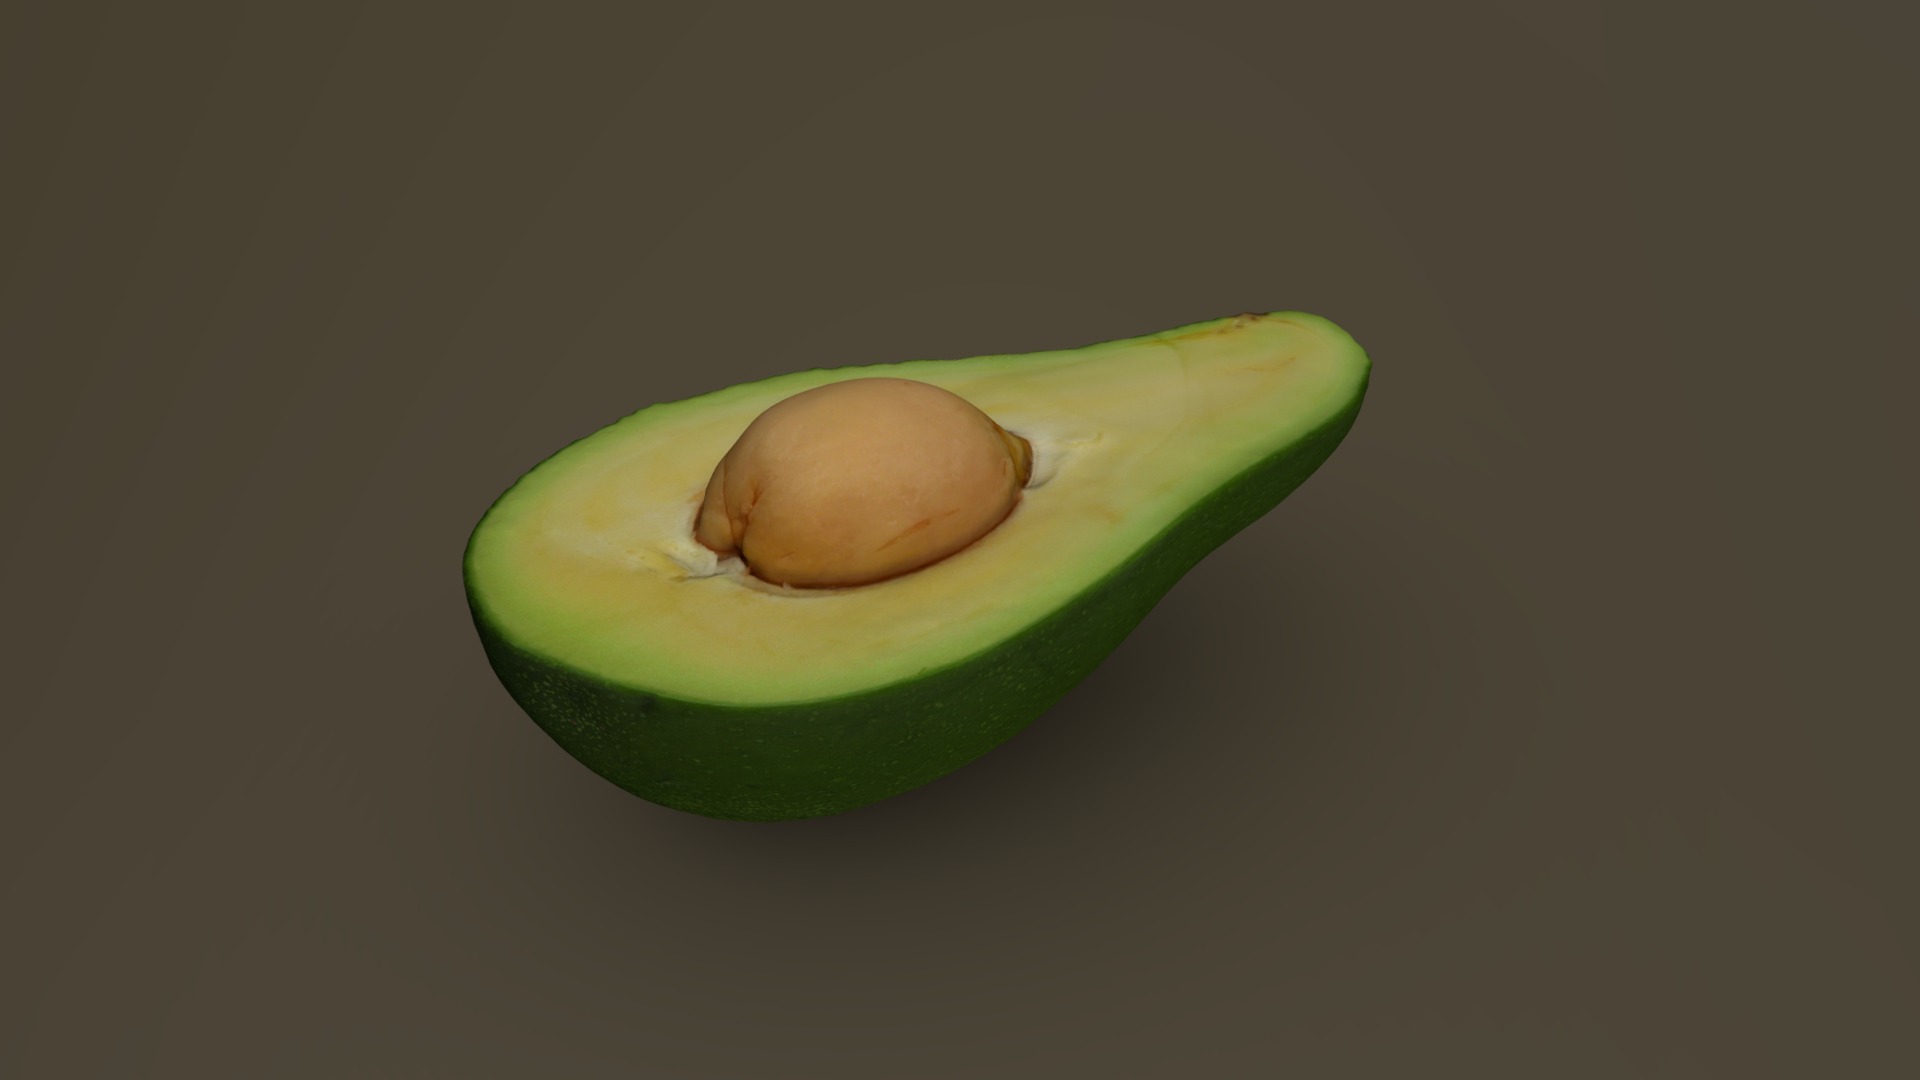 3D model Half Green Avocado with Pit 08 - This is a 3D model of the Half Green Avocado with Pit 08. The 3D model is about a green avocado with a hole in it.